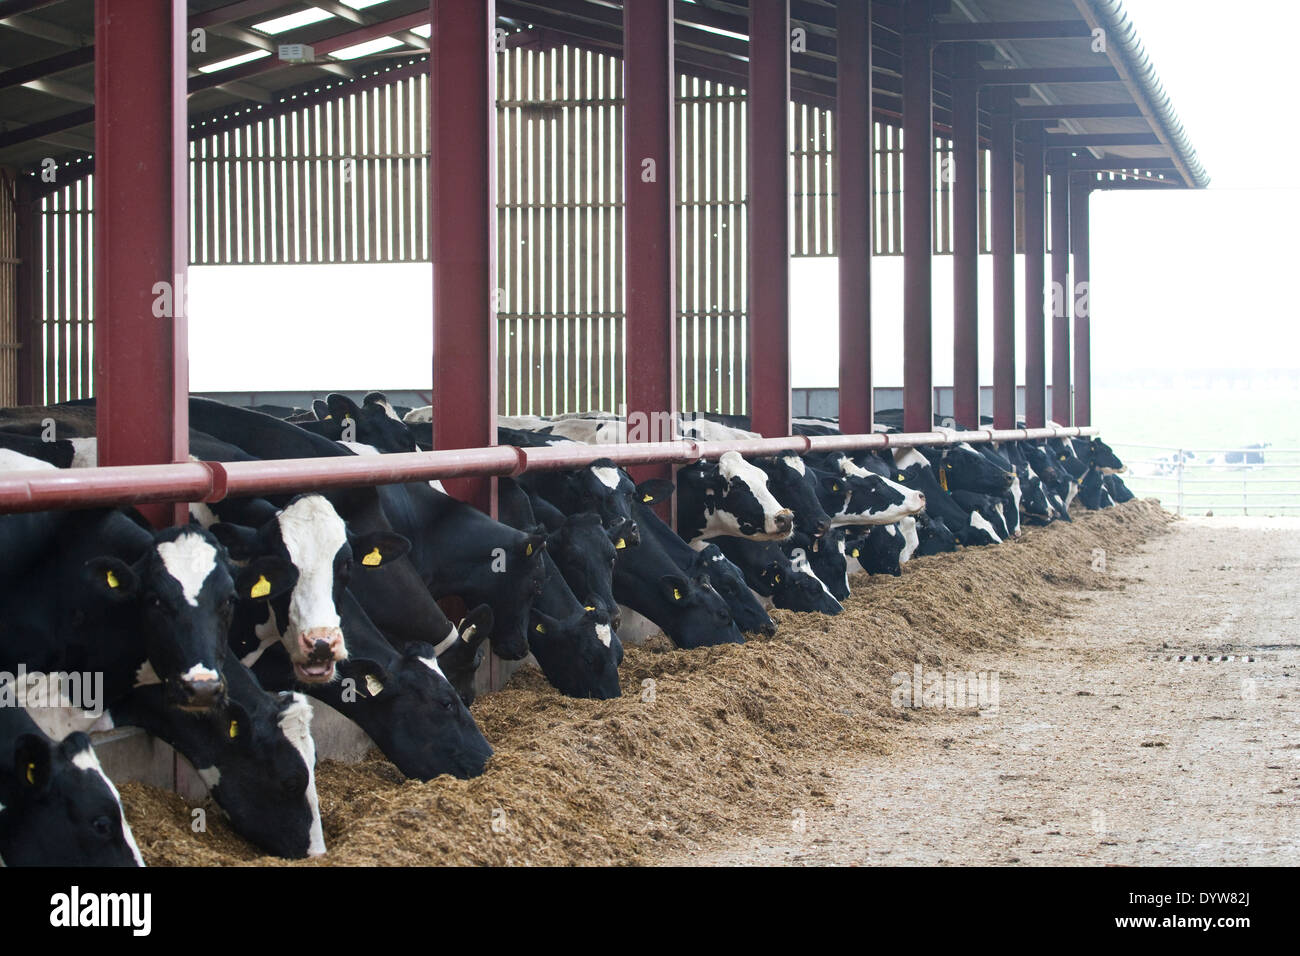 Dairy cows eating silage Stock Photo